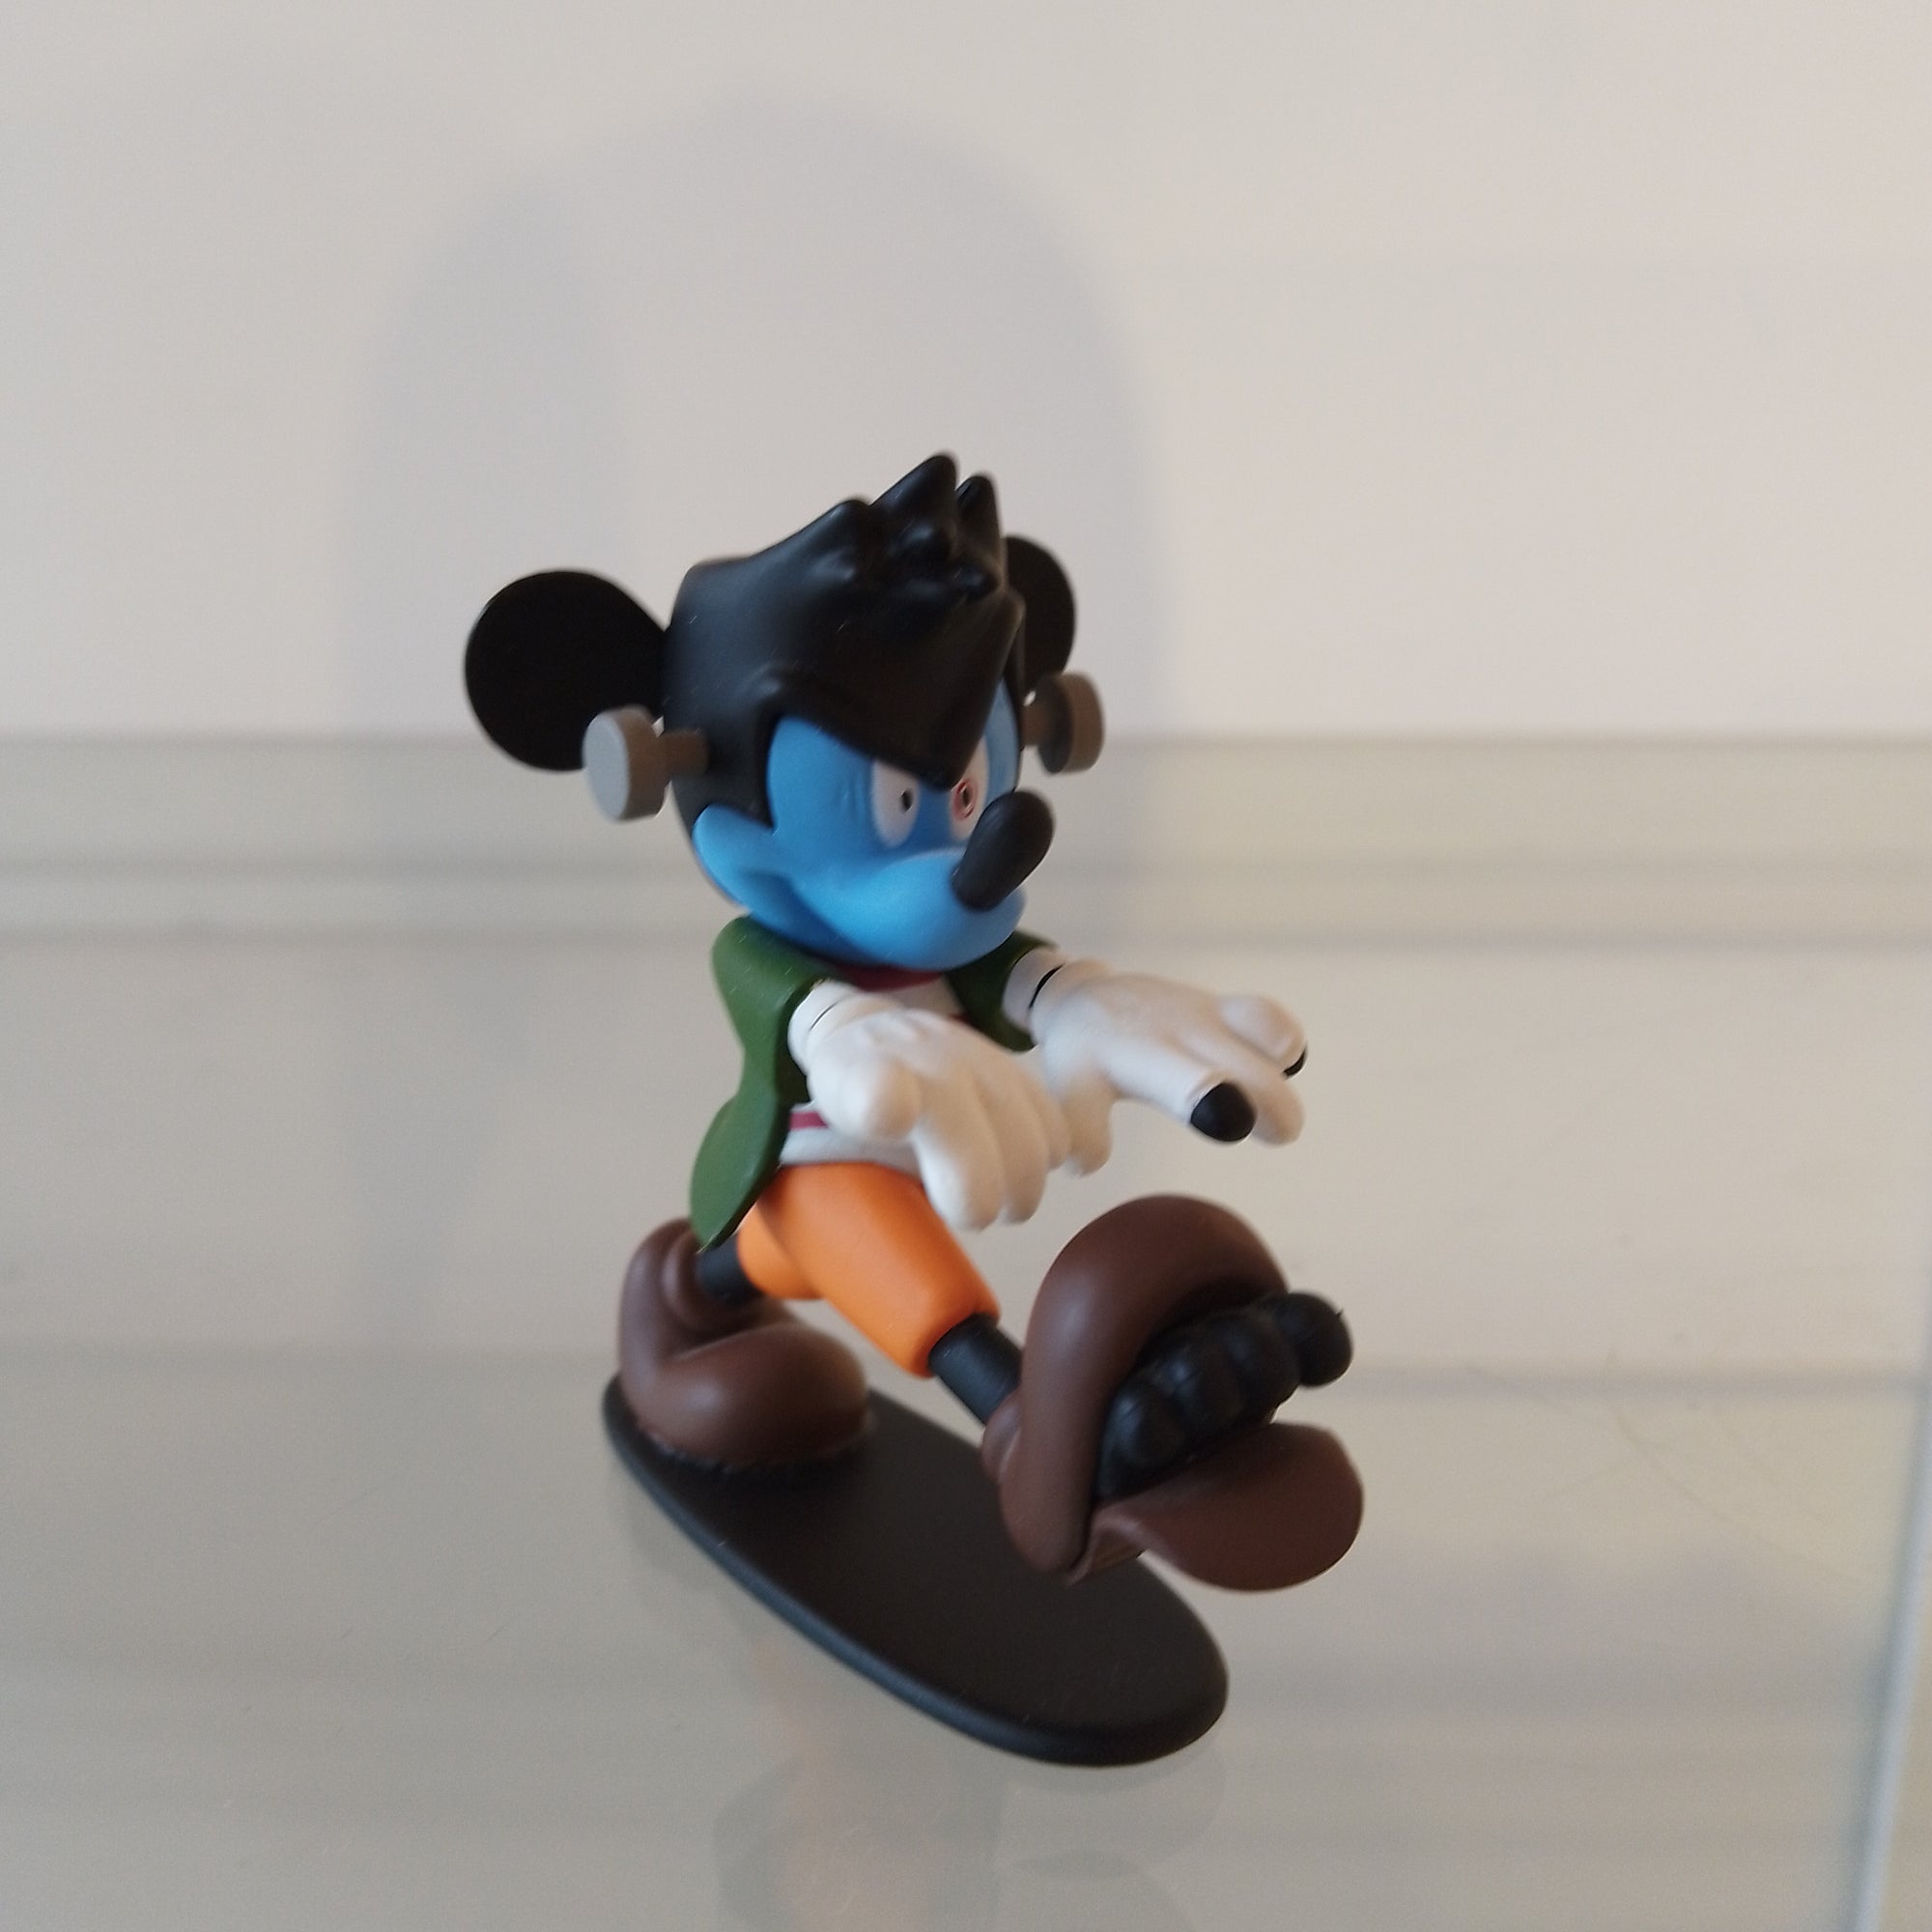 Mickey Mouse Monster Version - UDF Toy Figure by Medicom Toy